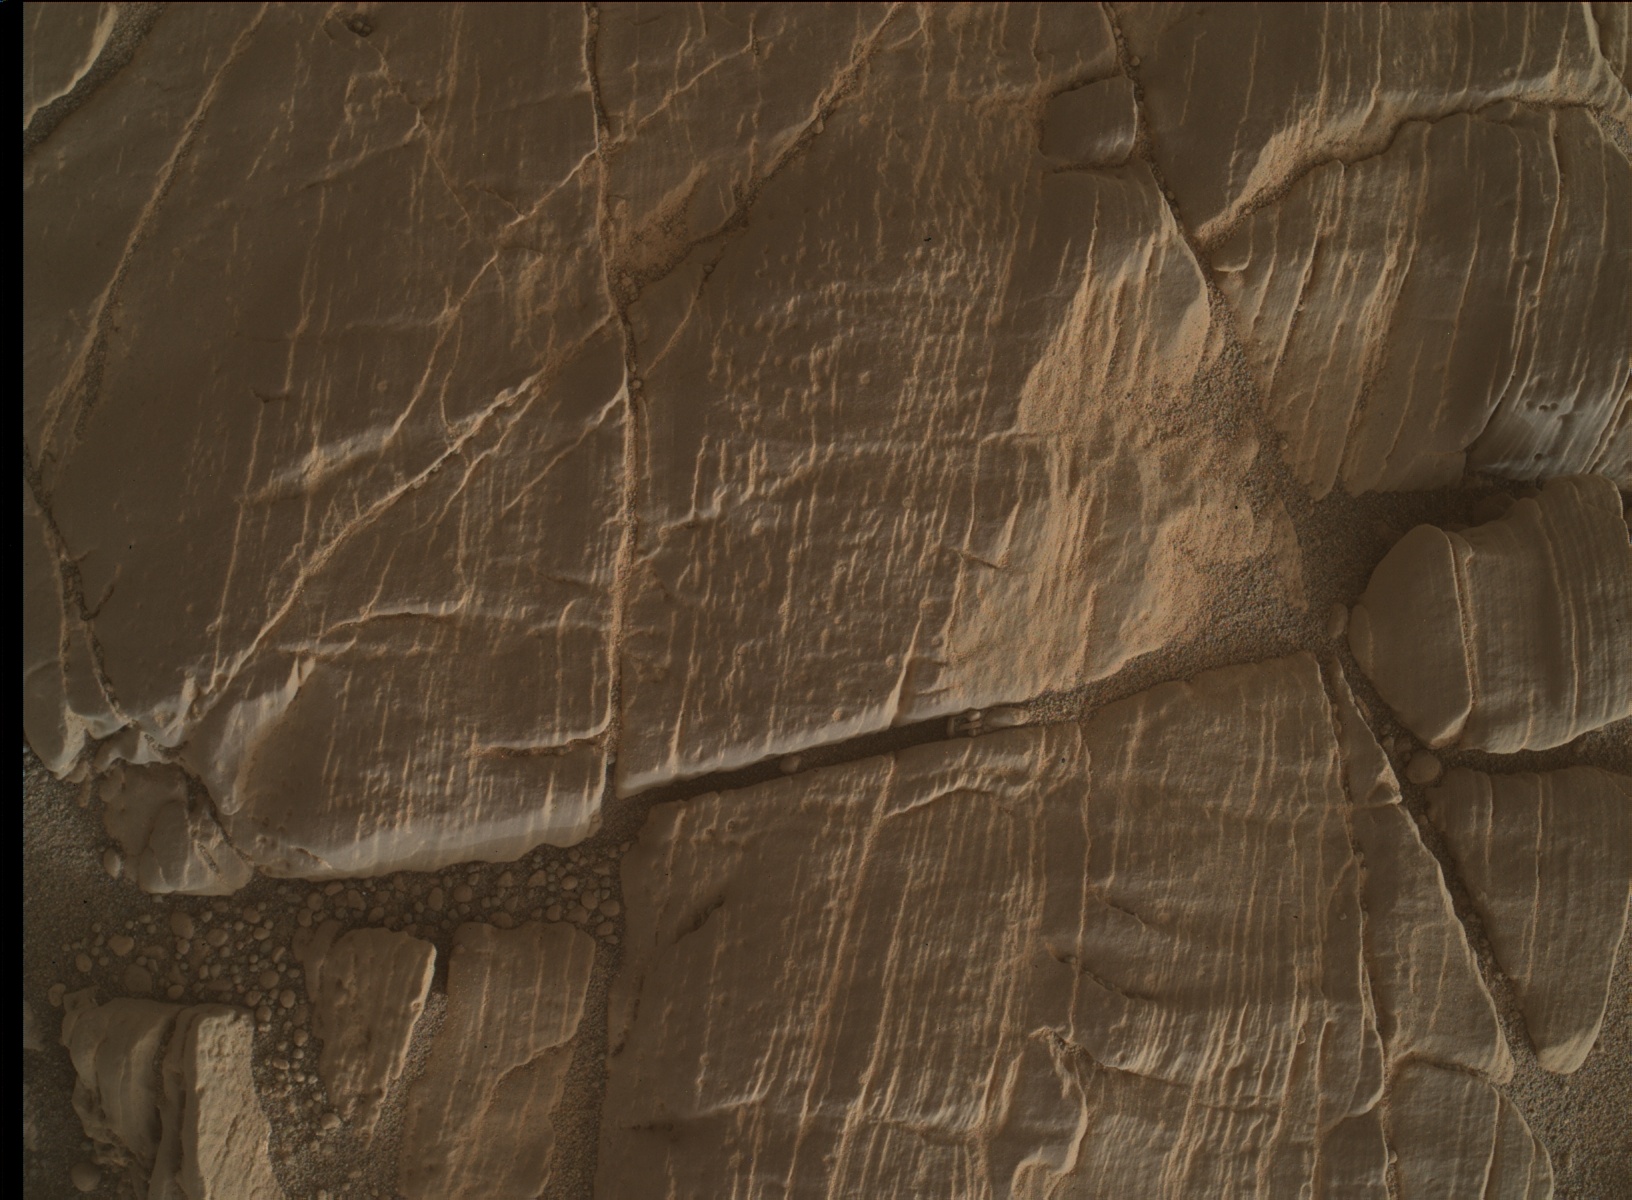 Nasa's Mars rover Curiosity acquired this image using its Mars Hand Lens Imager (MAHLI) on Sol 2470